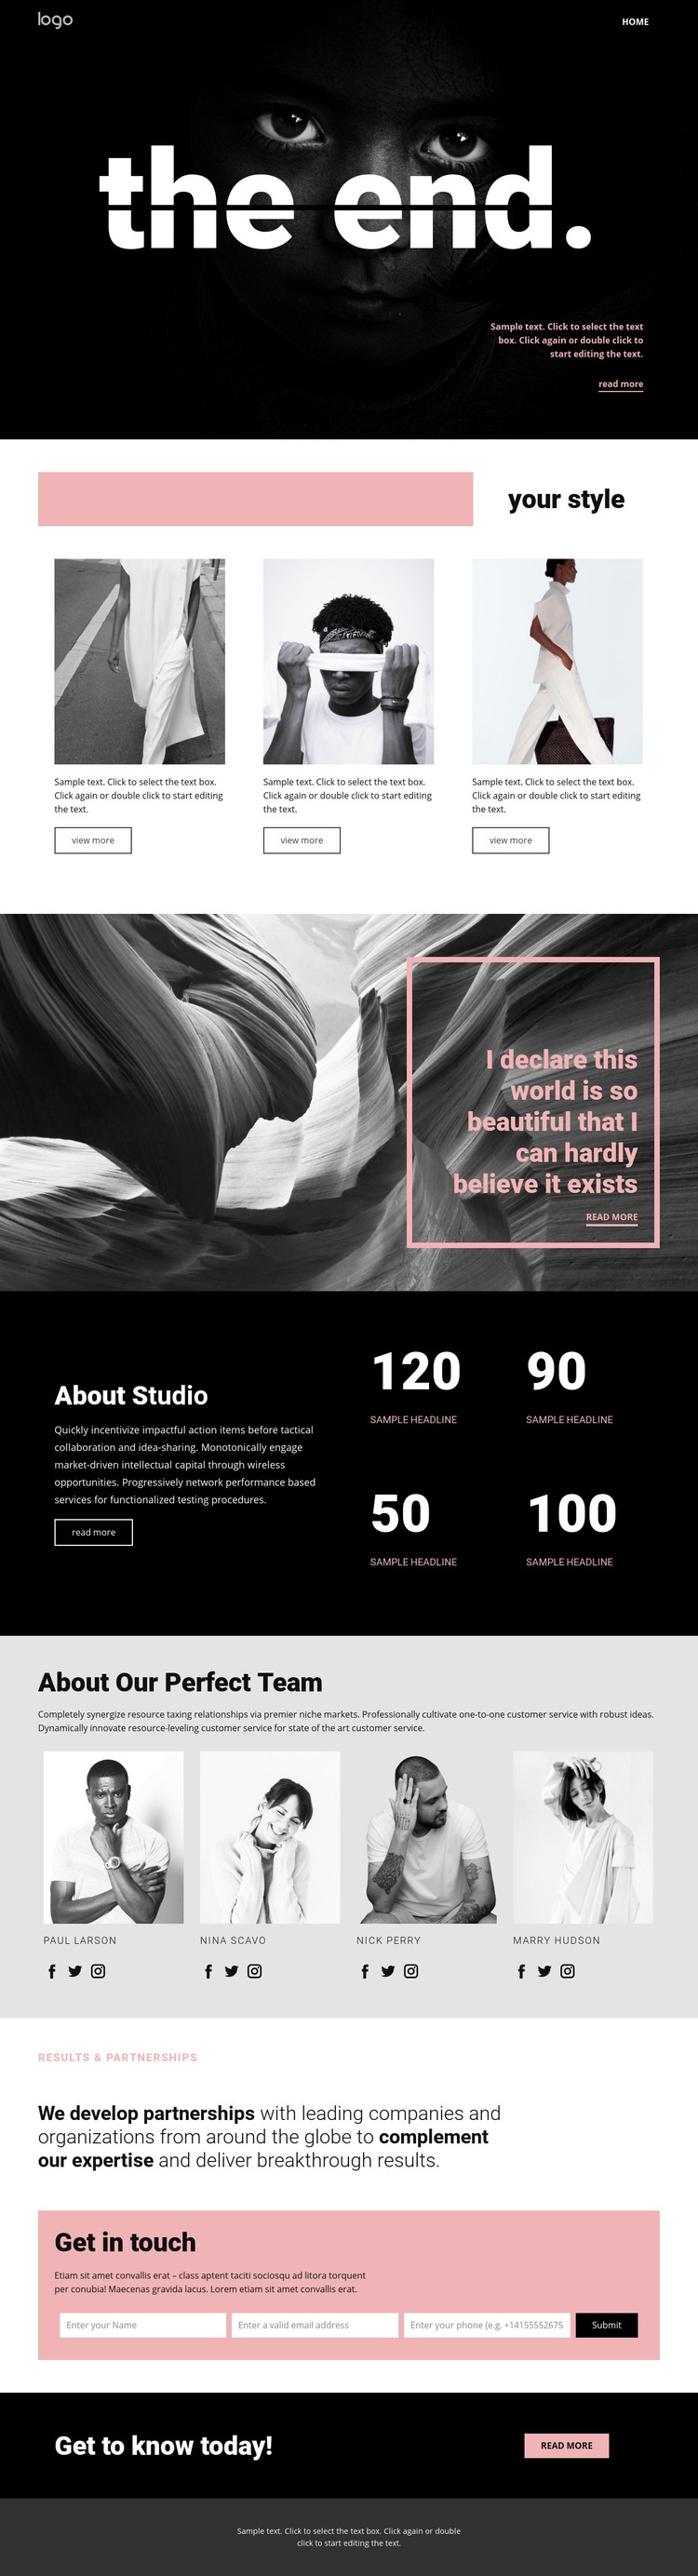 Perfecting styles of art Homepage Design